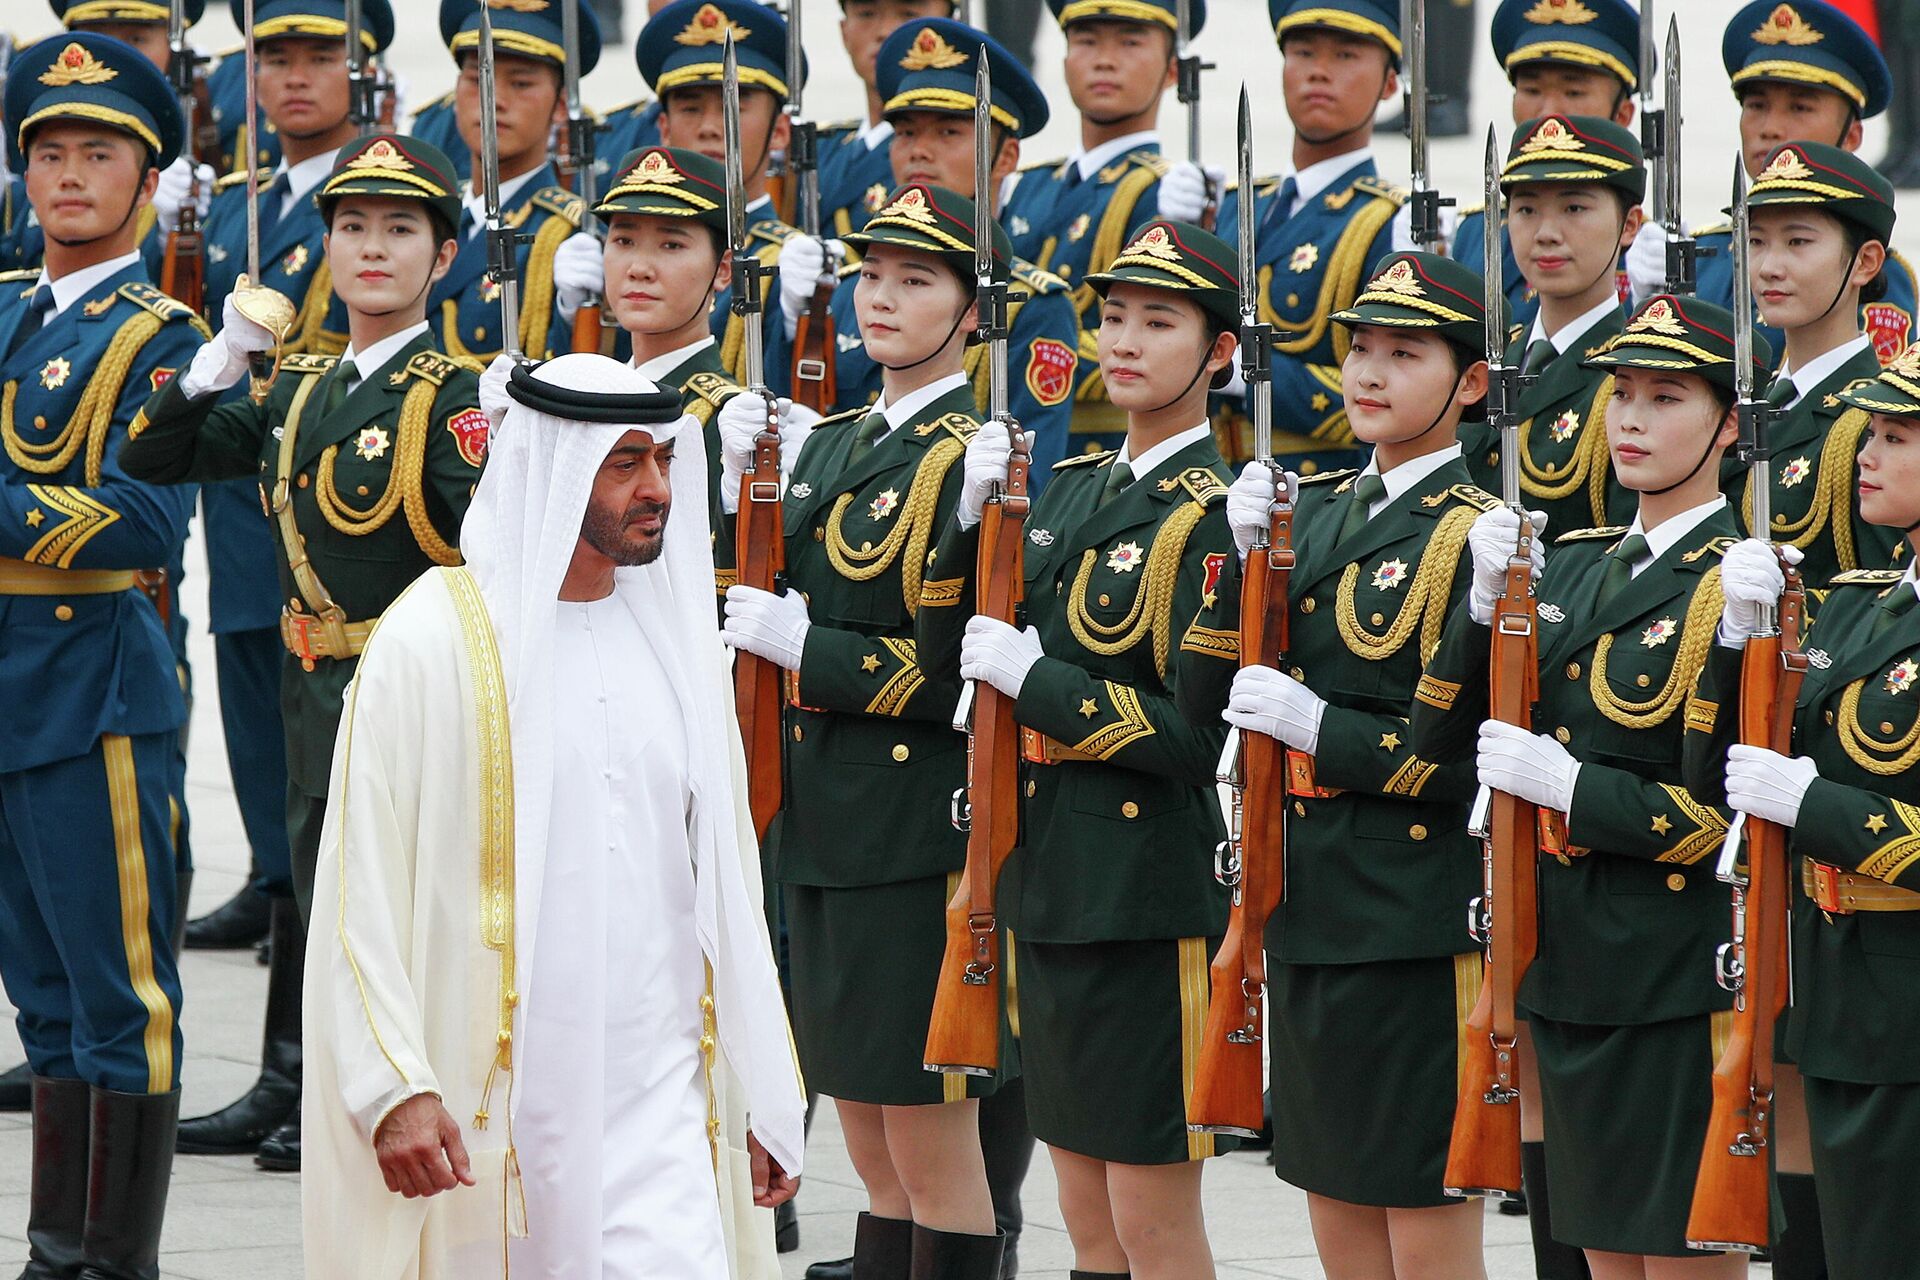 Abu Dhabi's Crown Prince, Sheikh Mohammed bin Zayed Al Nahyan, reviews an honor guard with Chinese President Xi Jinping during a welcome ceremony at the Great Hall of the People in Beijing, Monday, July 22, 2019.  - Sputnik International, 1920, 20.11.2021